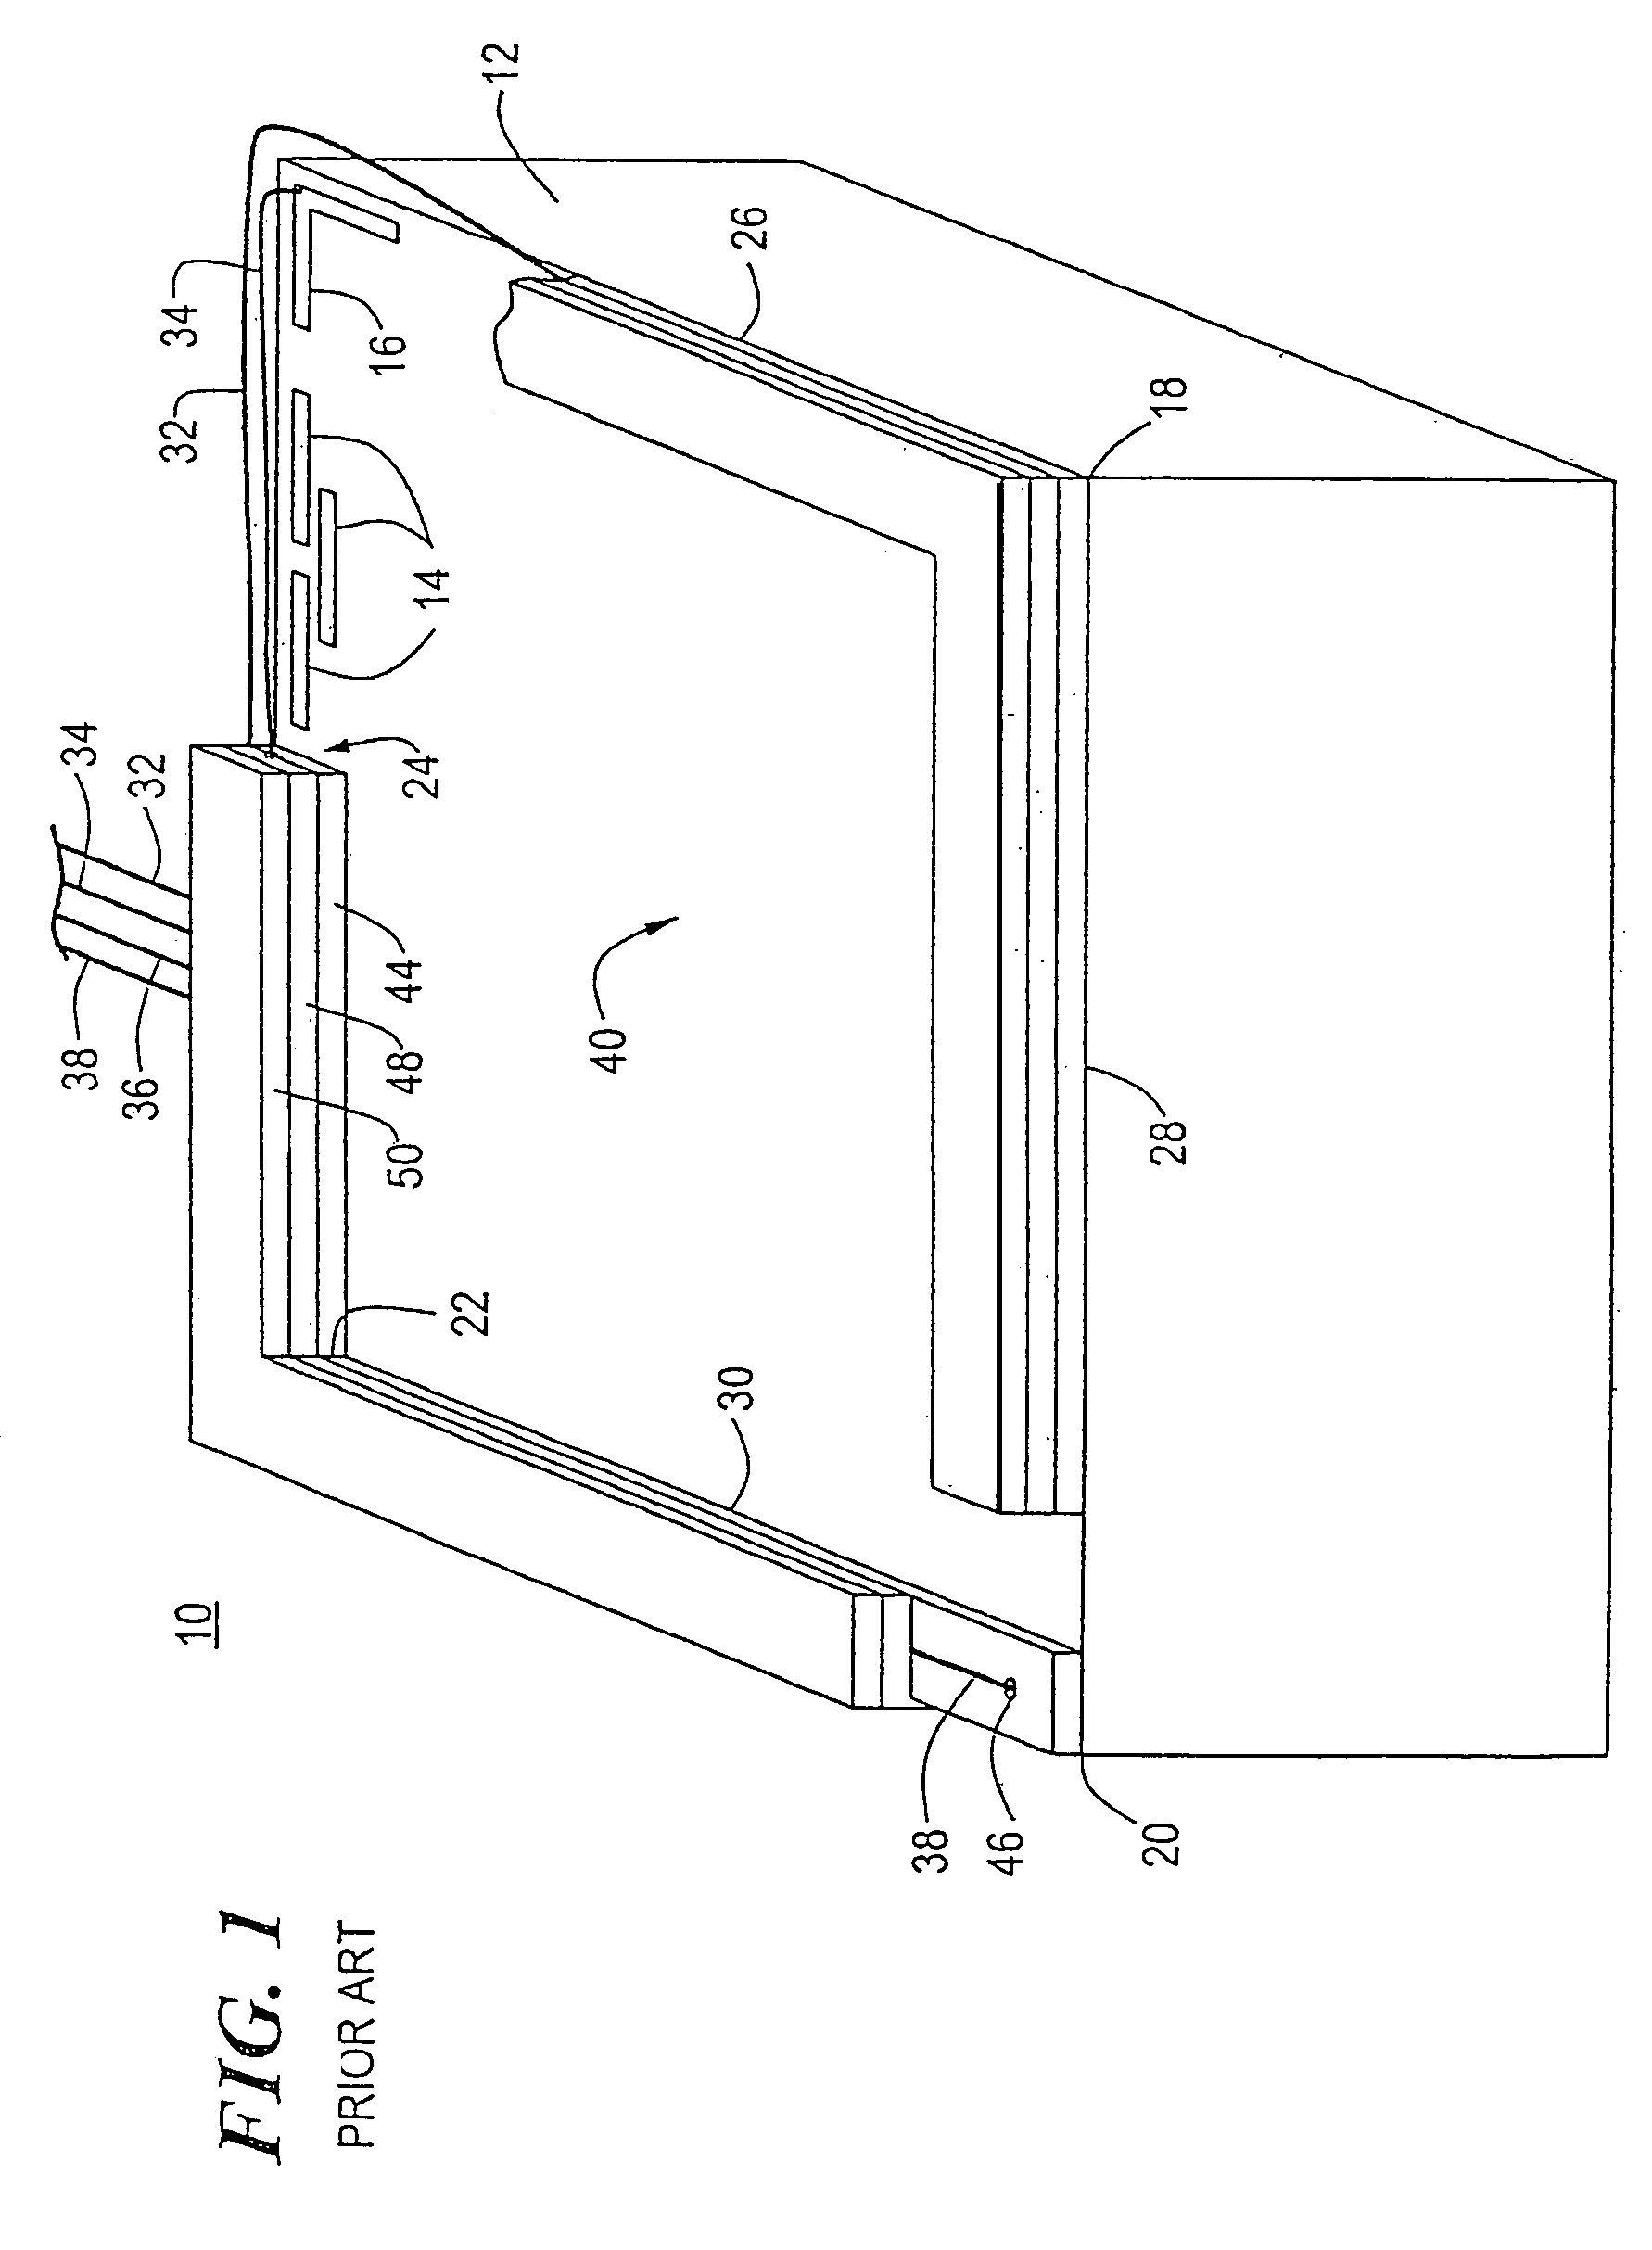 Touch screen panel with integral wiring traces